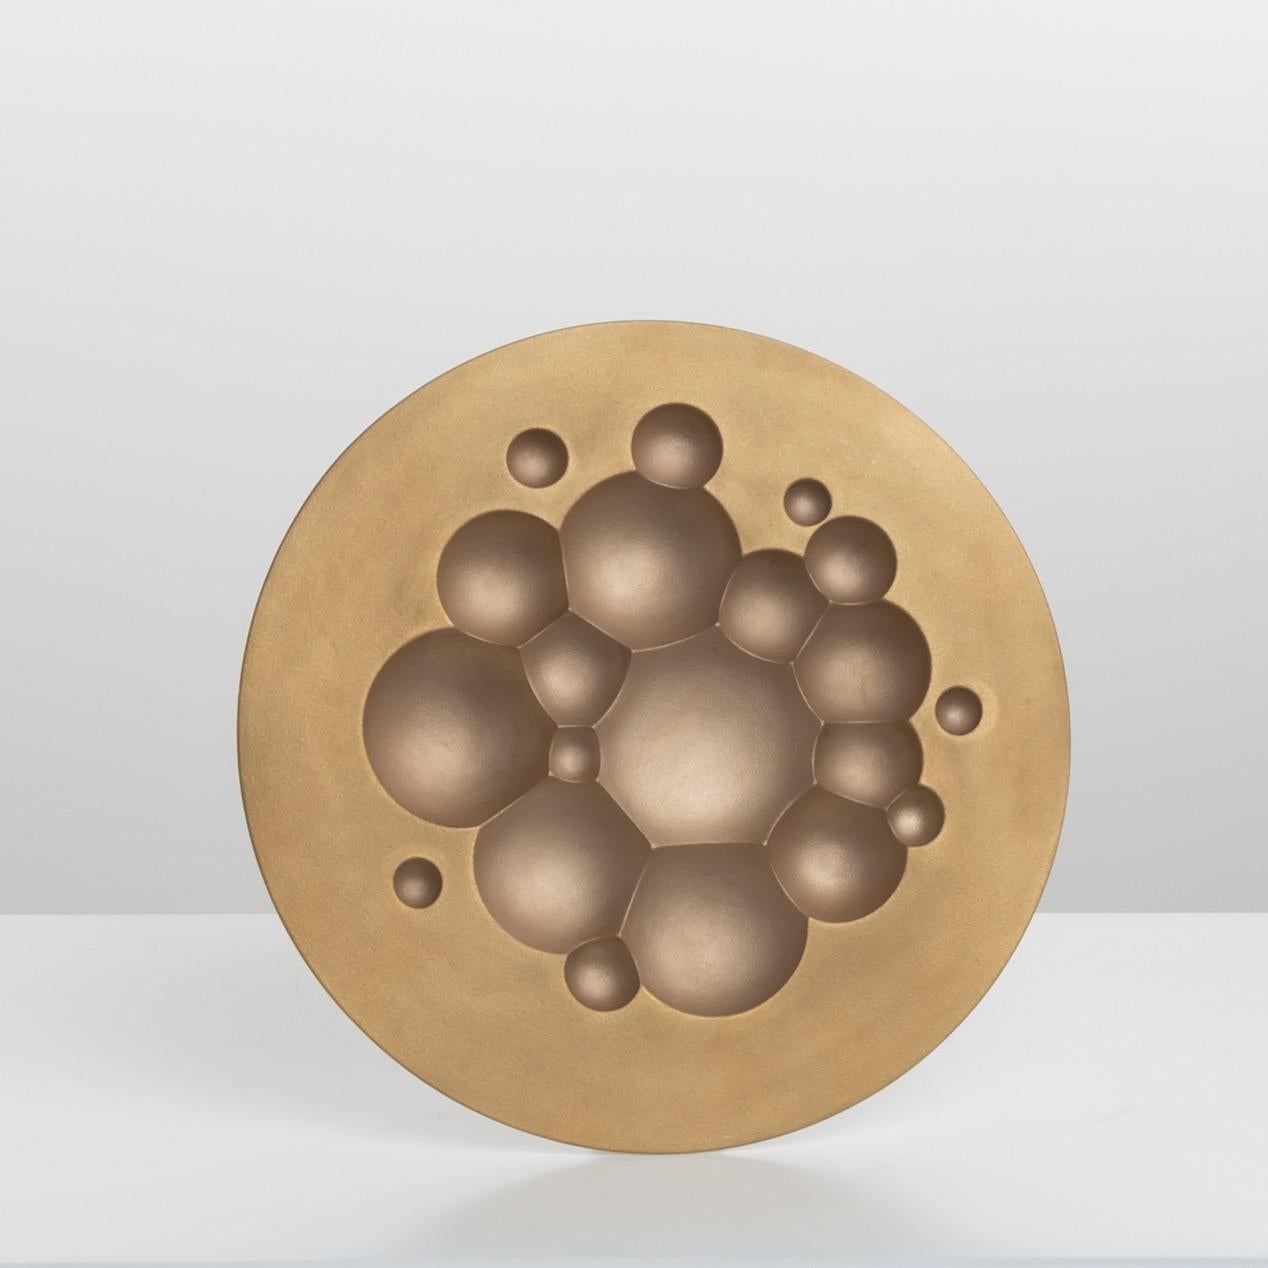 This porcelain wall decoration designed by Tapio Wirkkala is composed of inverted half bubbles on a gilded paint top surface, it is a lunar and poetic vision that Tapio Wirkkala offered to the manufacturer Rosenthal Studio in 1971.
This work is the